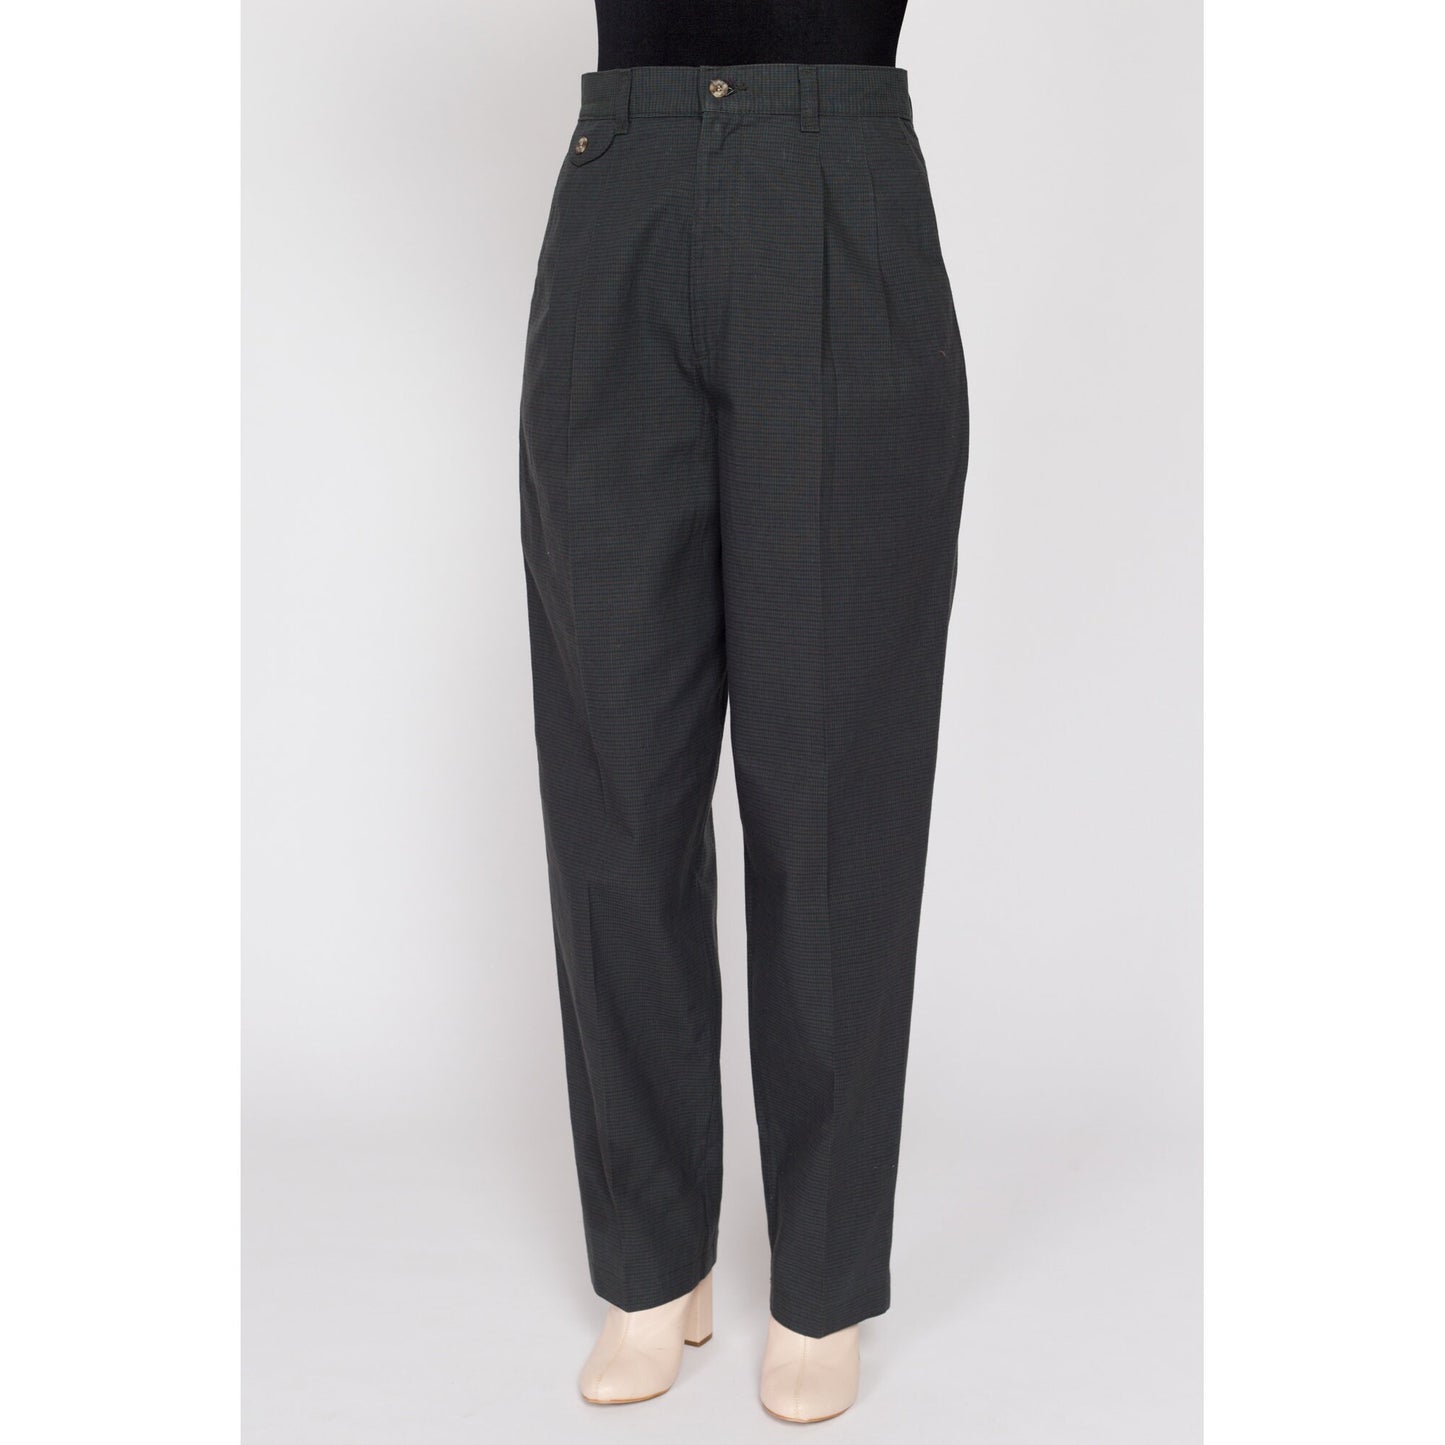 Medium 80s Lee Forest Green Plaid Pleated Trousers 28" | Vintage Cotton High Waisted Tapered Leg Pants